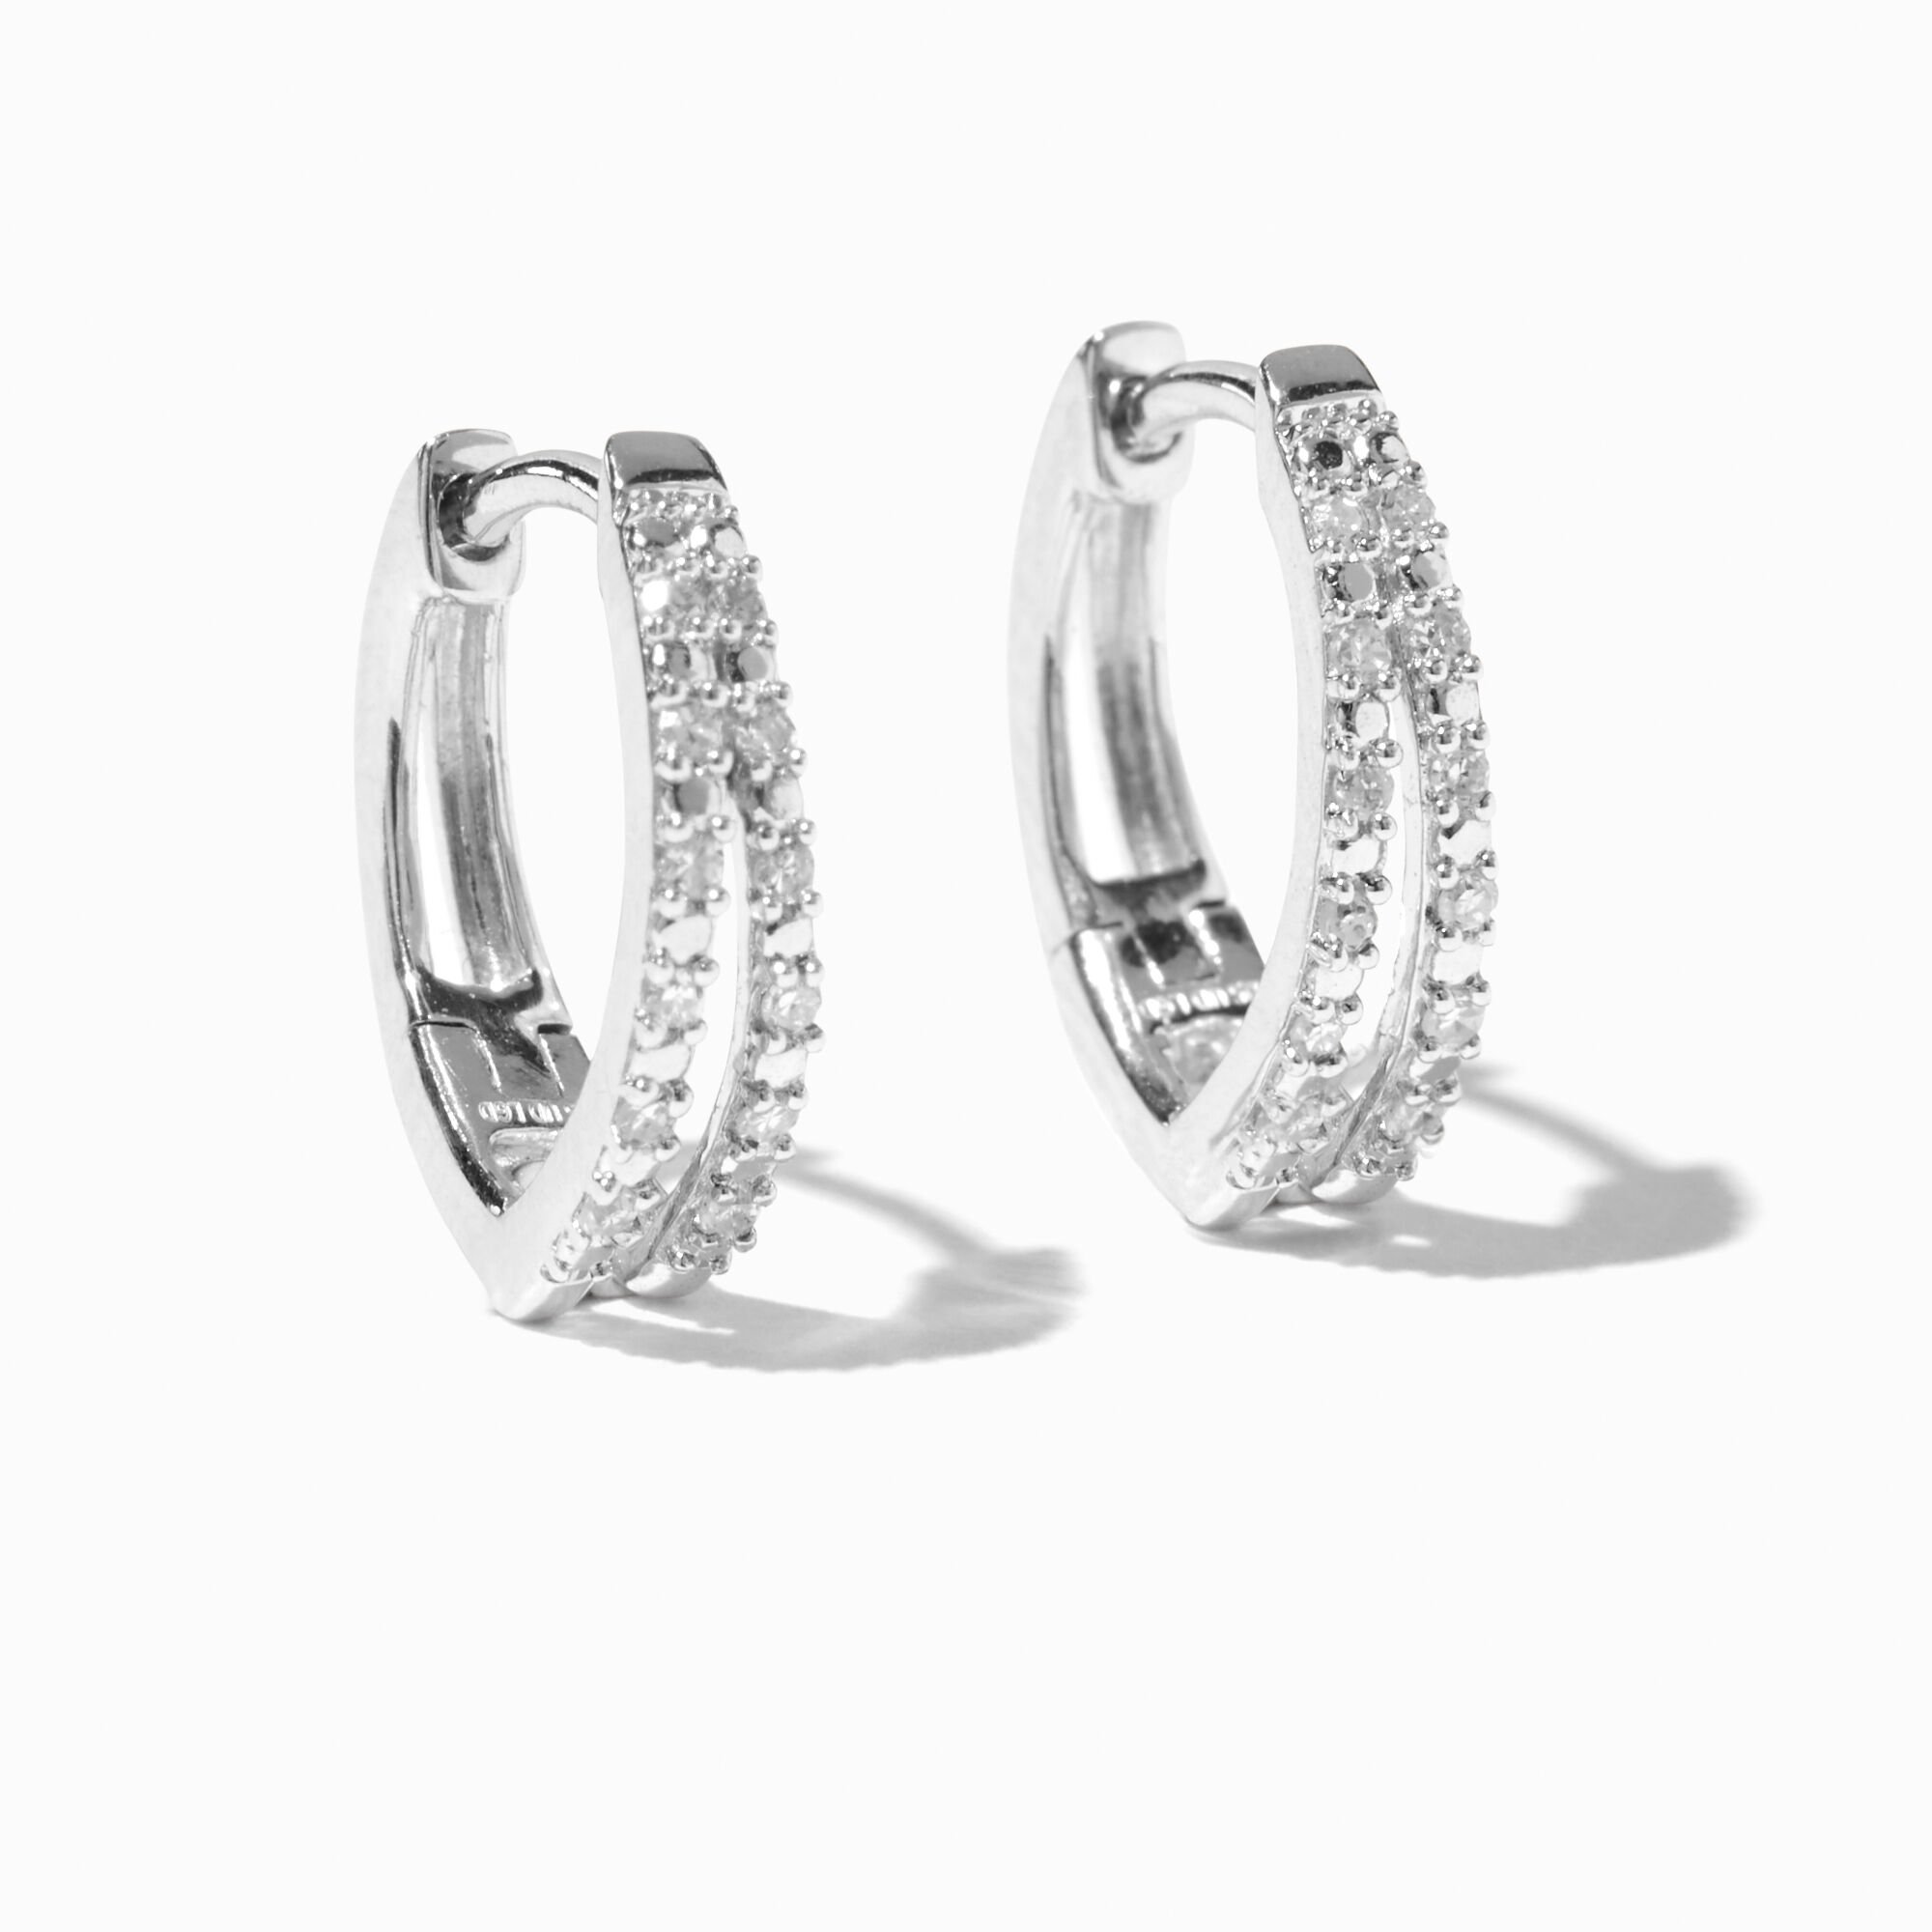 View C Luxe By Claires 110 Ct Tw Laboratory Grown Diamond 10MM Embellished Double Hoop Earrings Silver information